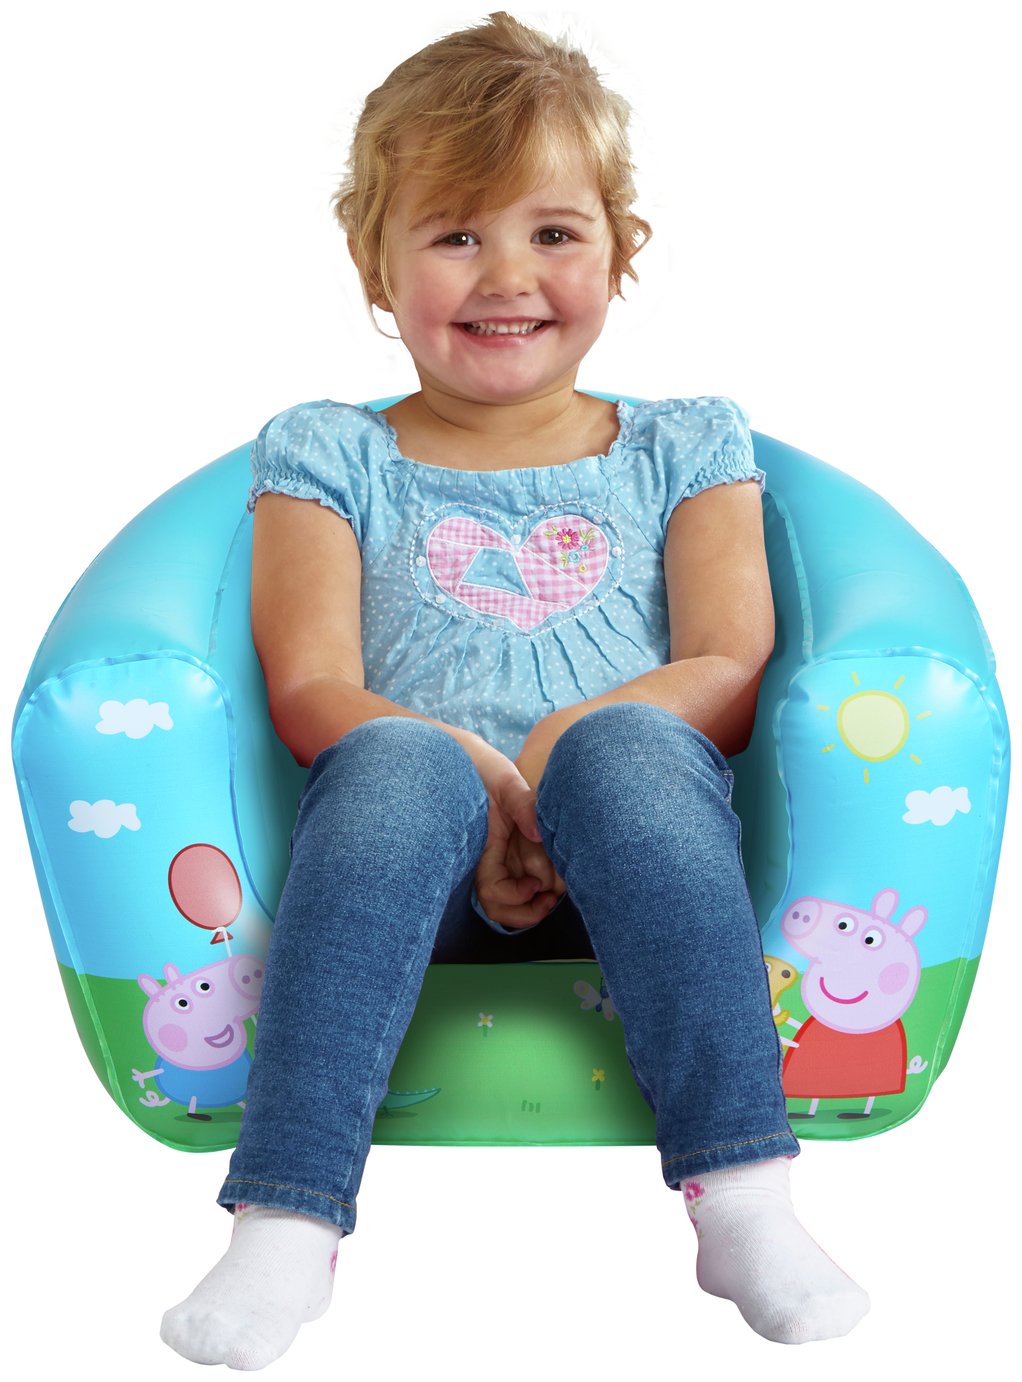 Peppa Pig Flocked Chair Review